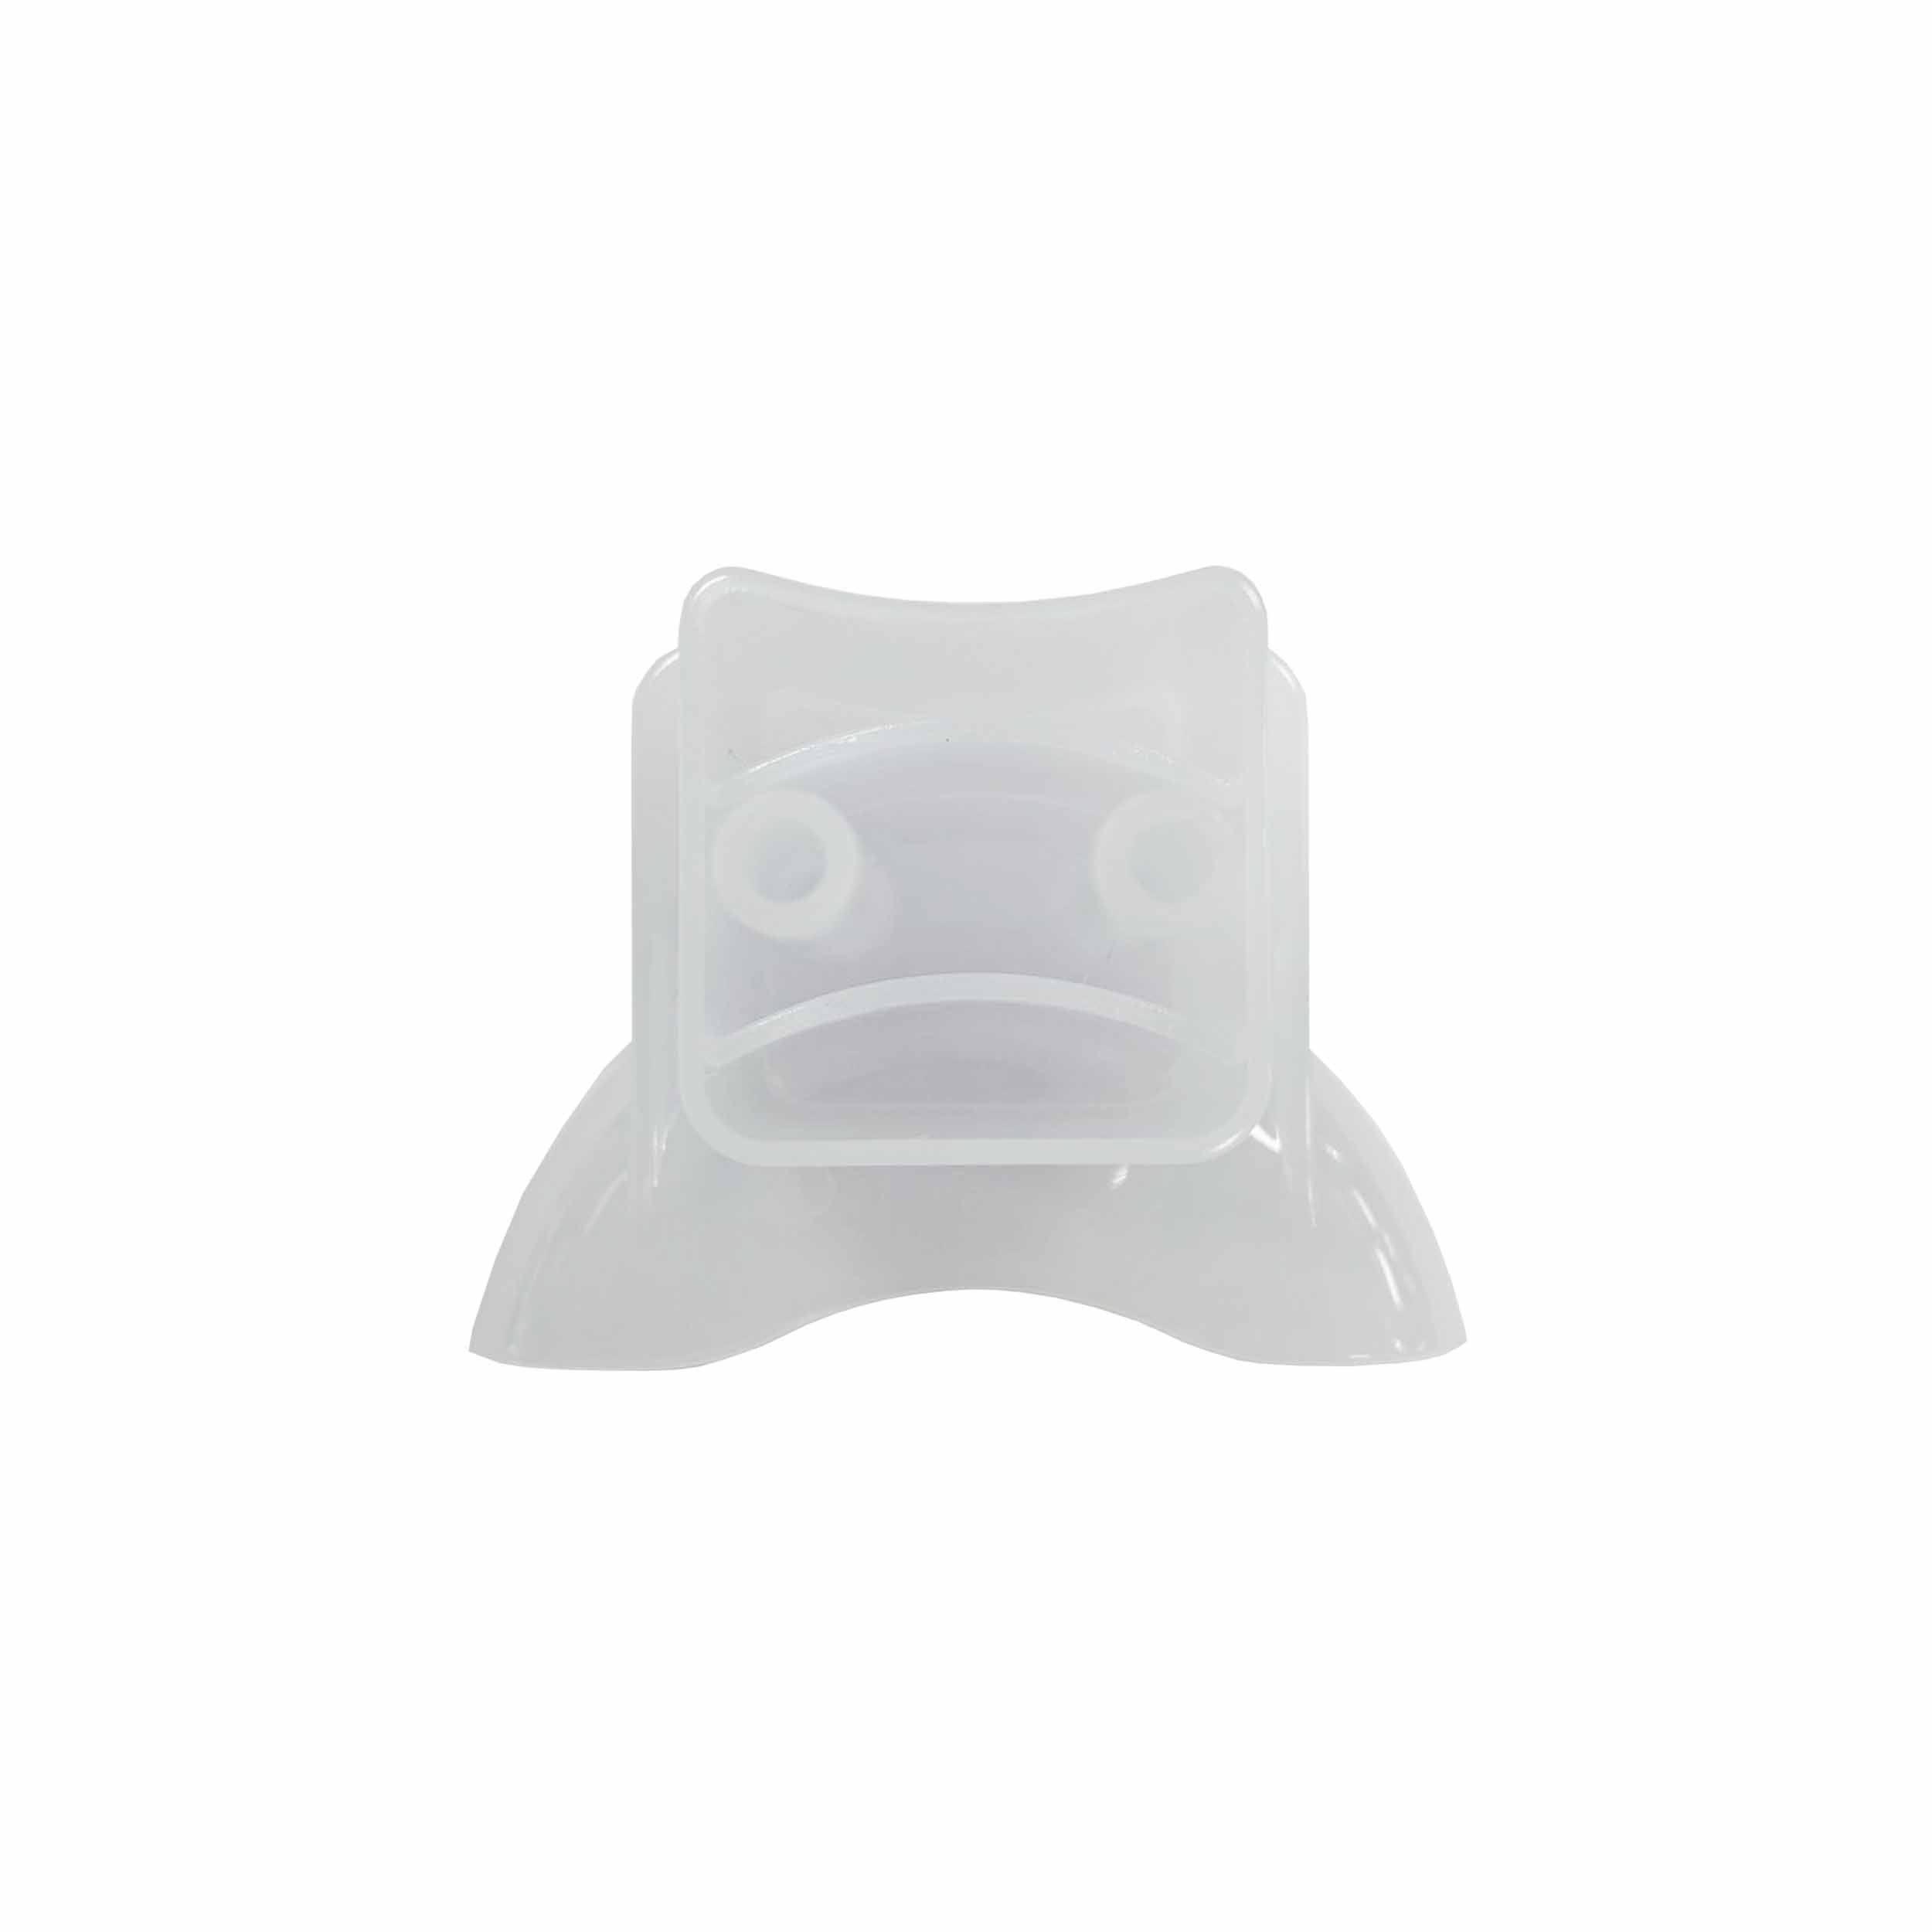 Edentulous Chinrest (M0400421 Cover-Accessories Toothless Chinrest -A/Pc-Clear Gray/M0028885)